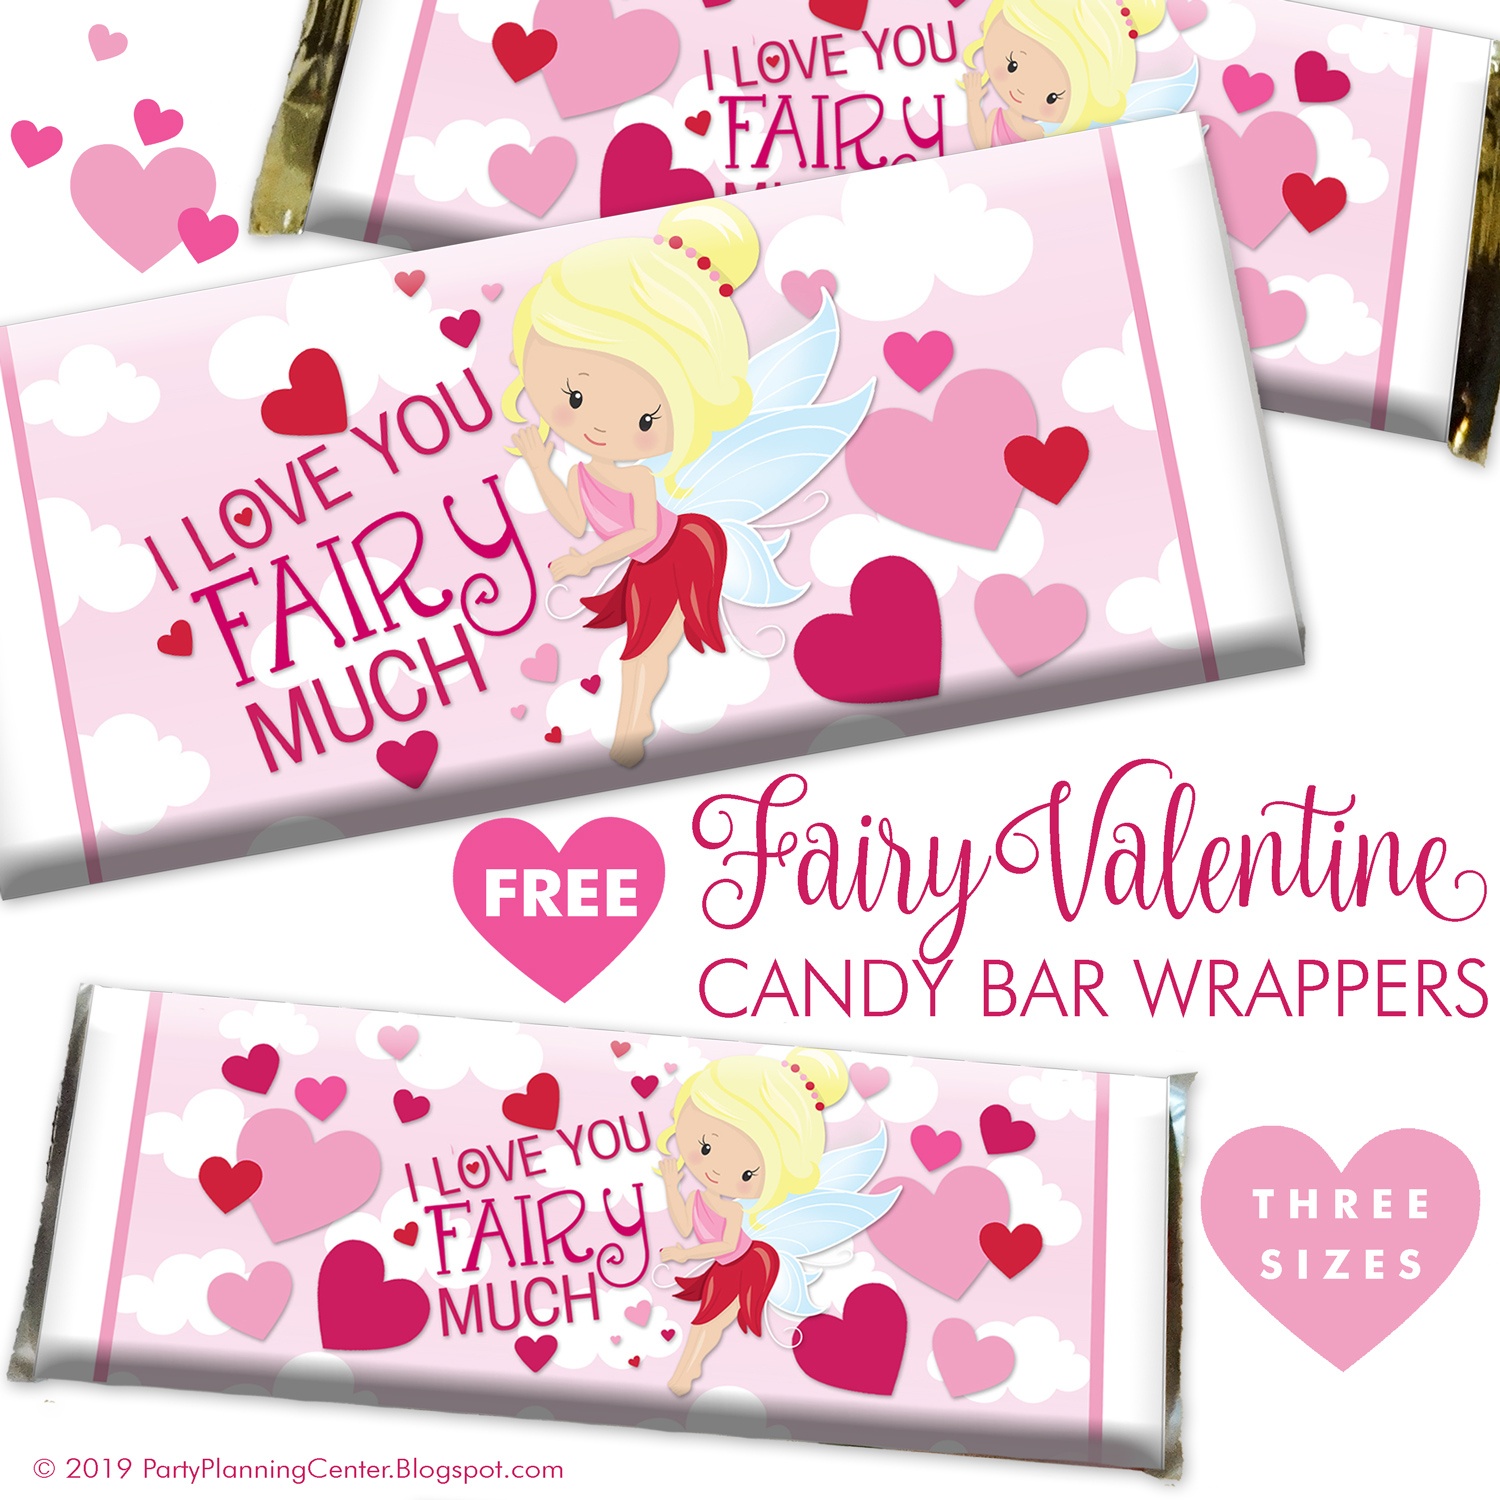 Can&amp;#039;t Find Substitution For Tag [Post.body]--&amp;gt; Free Fairy Hershey - Free Printable Chocolate Wrappers